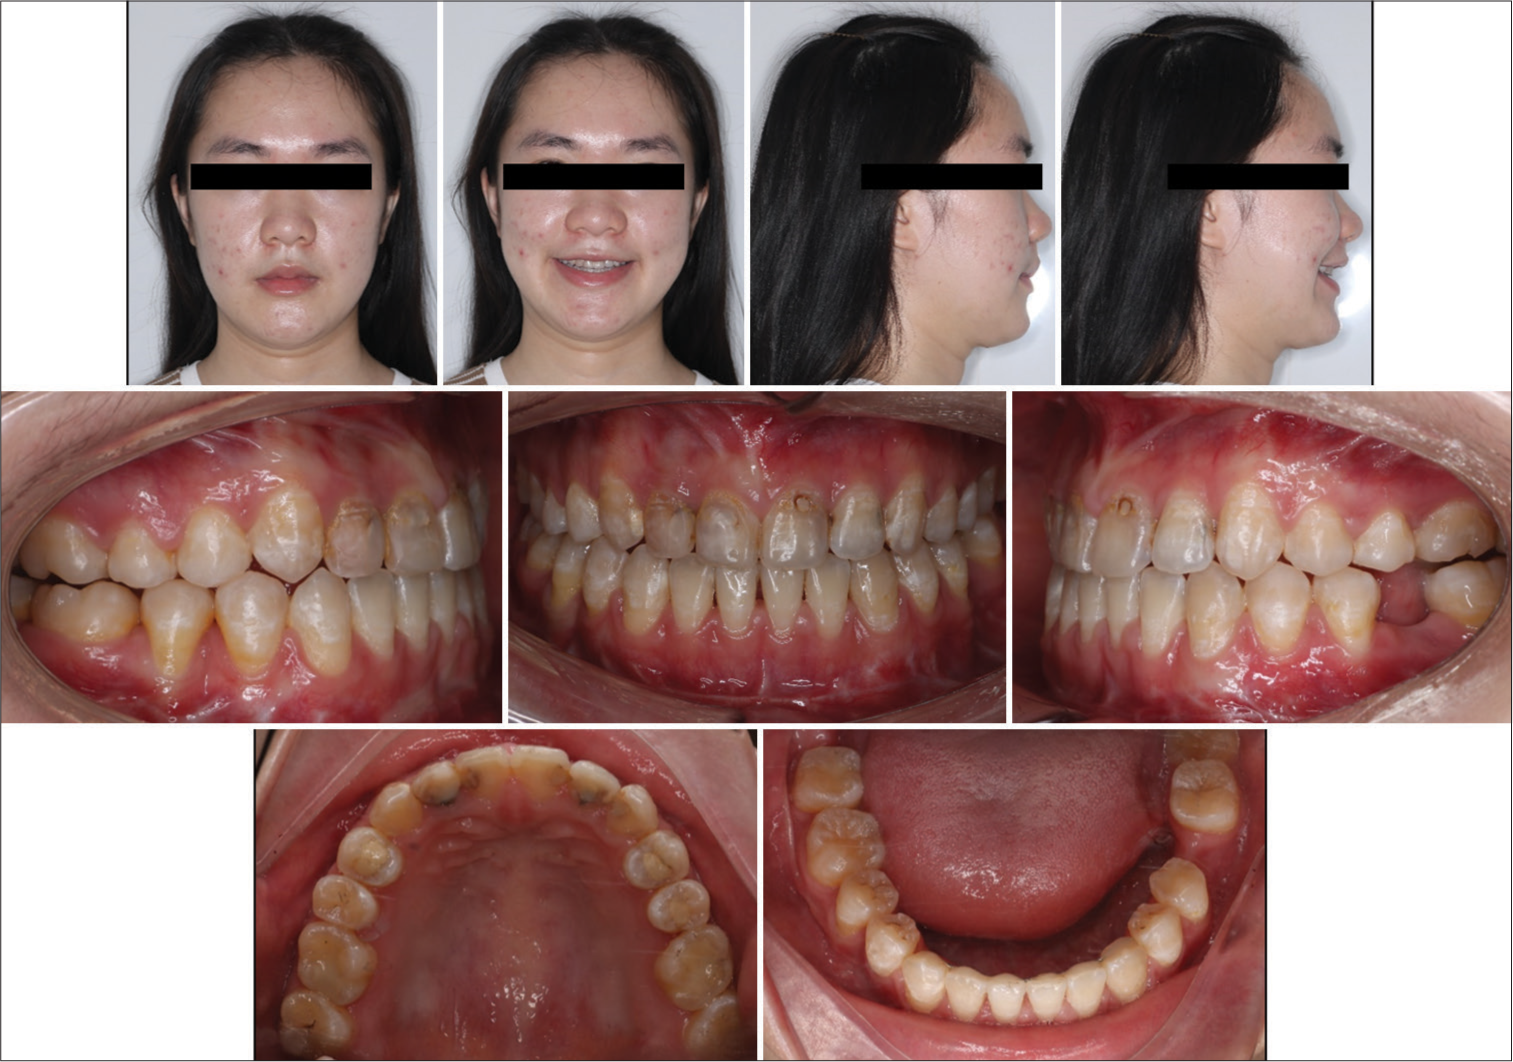 Post-treatment facial and intraoral photographs.